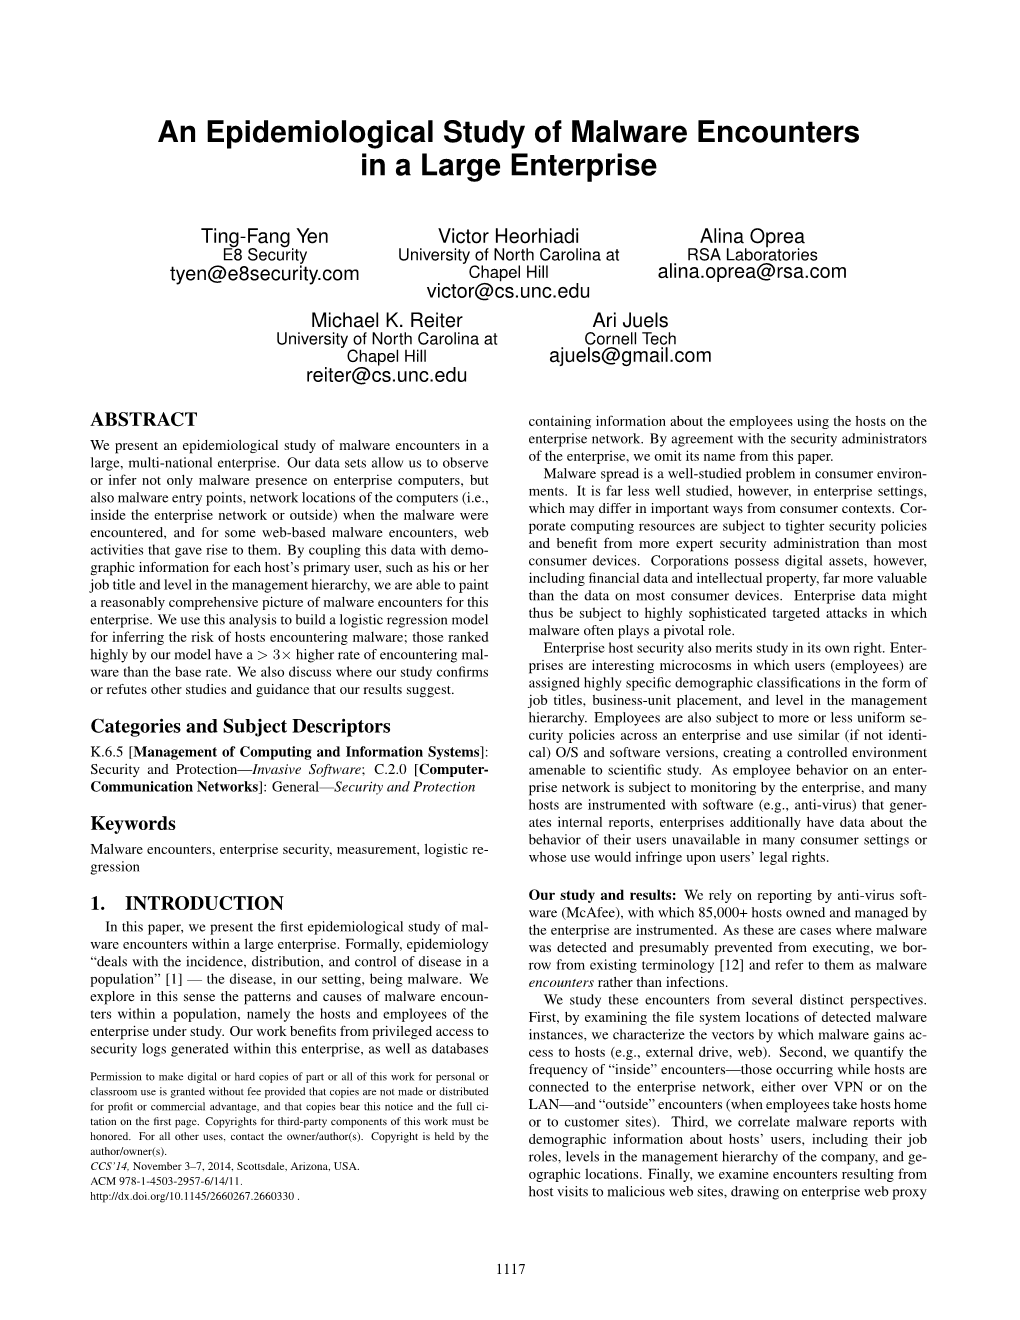 An Epidemiological Study of Malware Encounters in a Large Enterprise